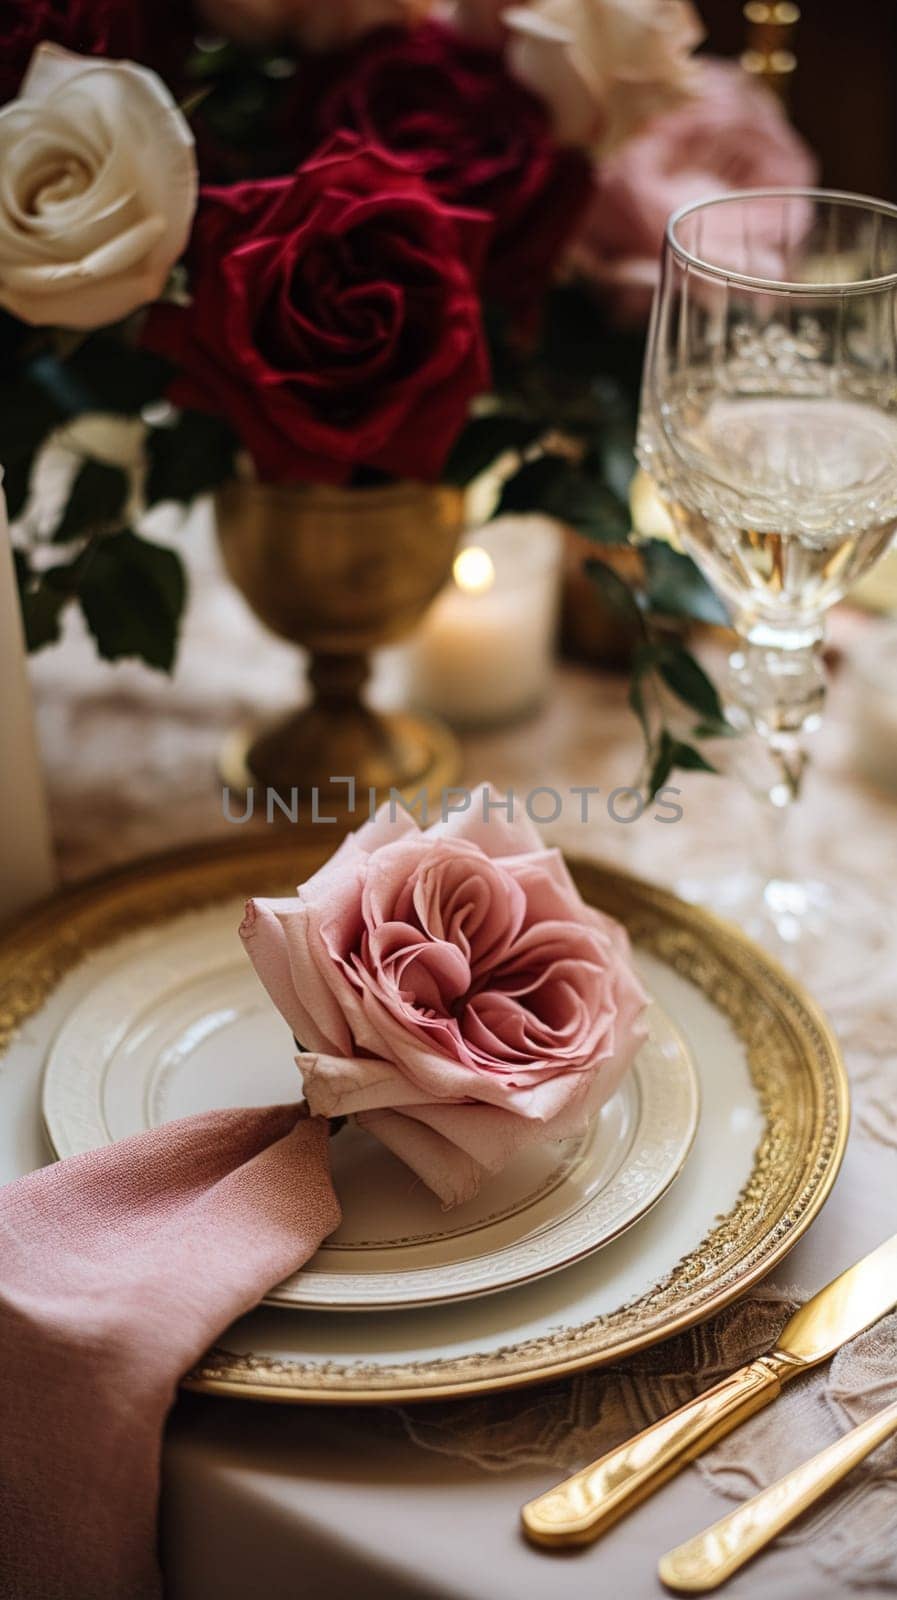 Elegant tablescape, formal dinner table setting with red roses and wine, elegant table decor for wedding, dinner party and holiday event decoration, home styling by Anneleven